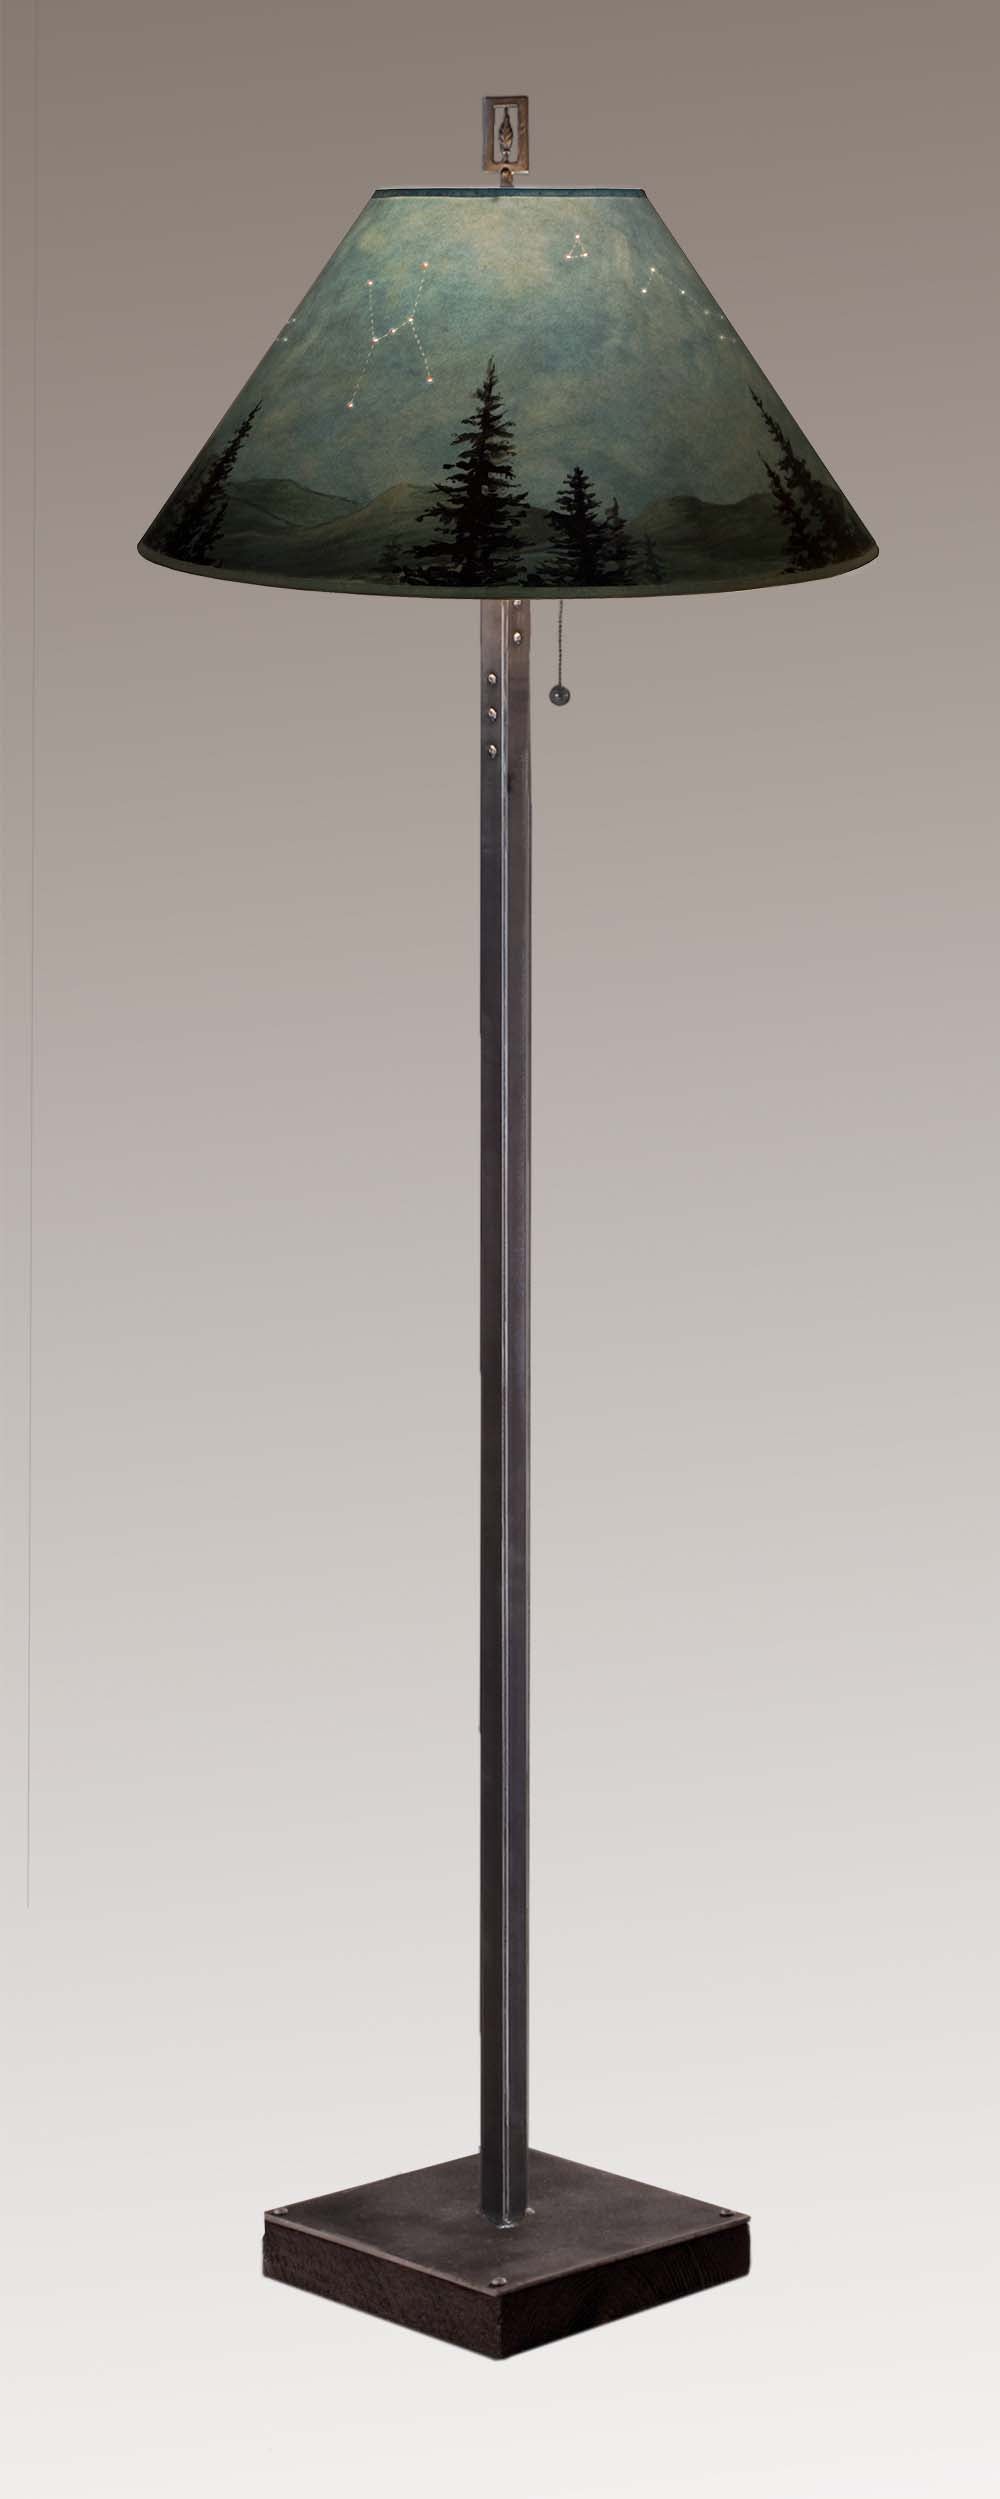 Janna Ugone & Co Floor Lamps Steel Floor Lamp on  Reclaimed Wood with Large Conical Shade in Midnight Sky